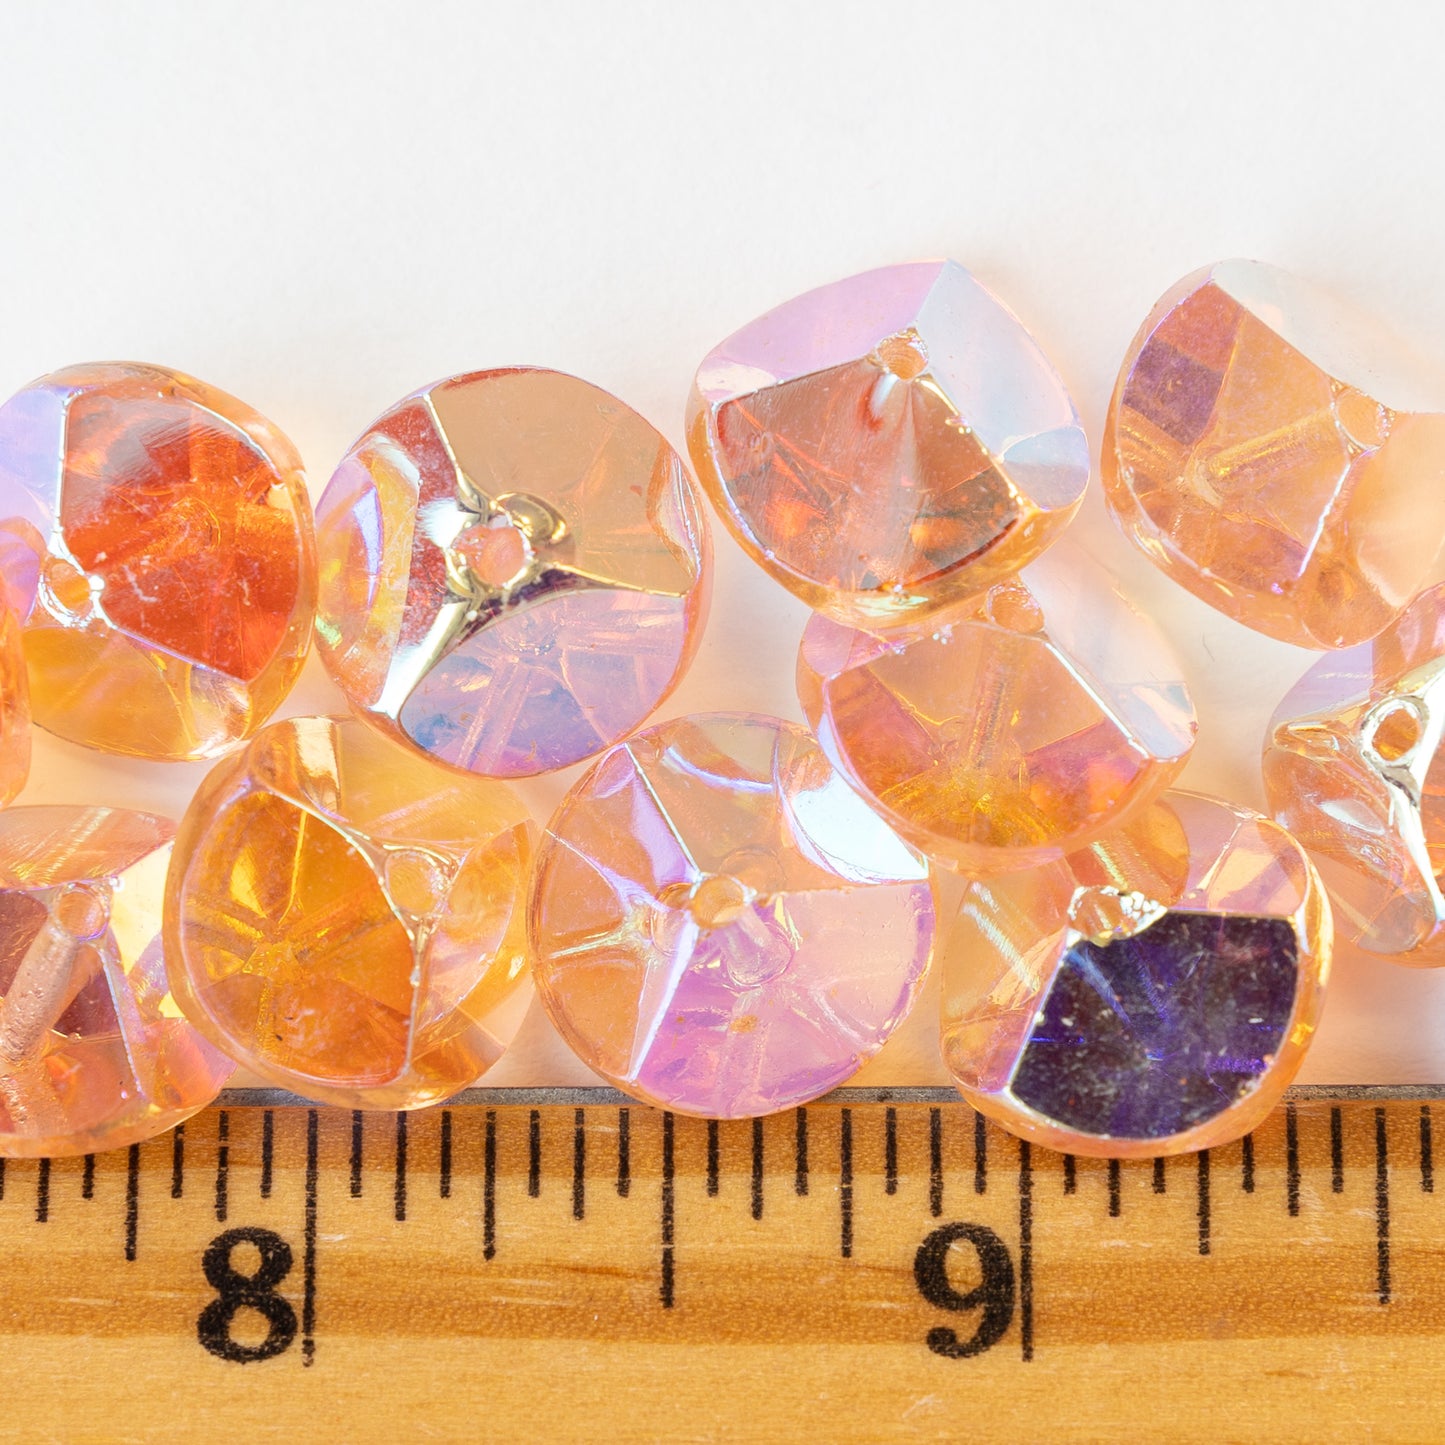 15mm Special Cut Beads - Peachy Pink AB - 2 beads